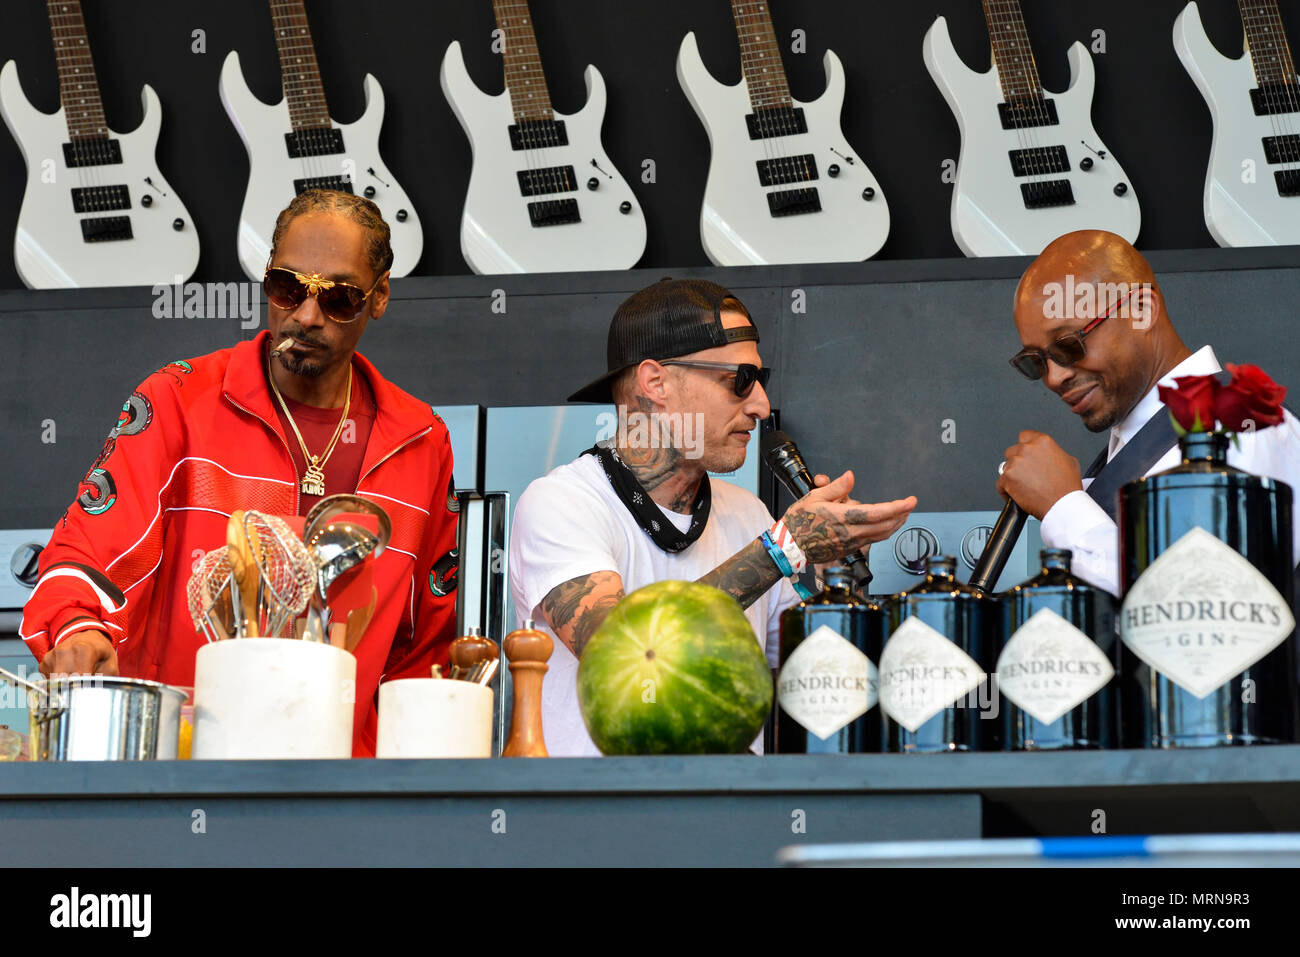 Napa, California, May 26, 2018, Snoop Dogg, Michael Voltaggio and Warren G on the Williams and Sonoma Culinary Stage at the 2018 BottleRock Festival in Napa California, Credit: Ken Howard/Alamy Live News Stock Photo